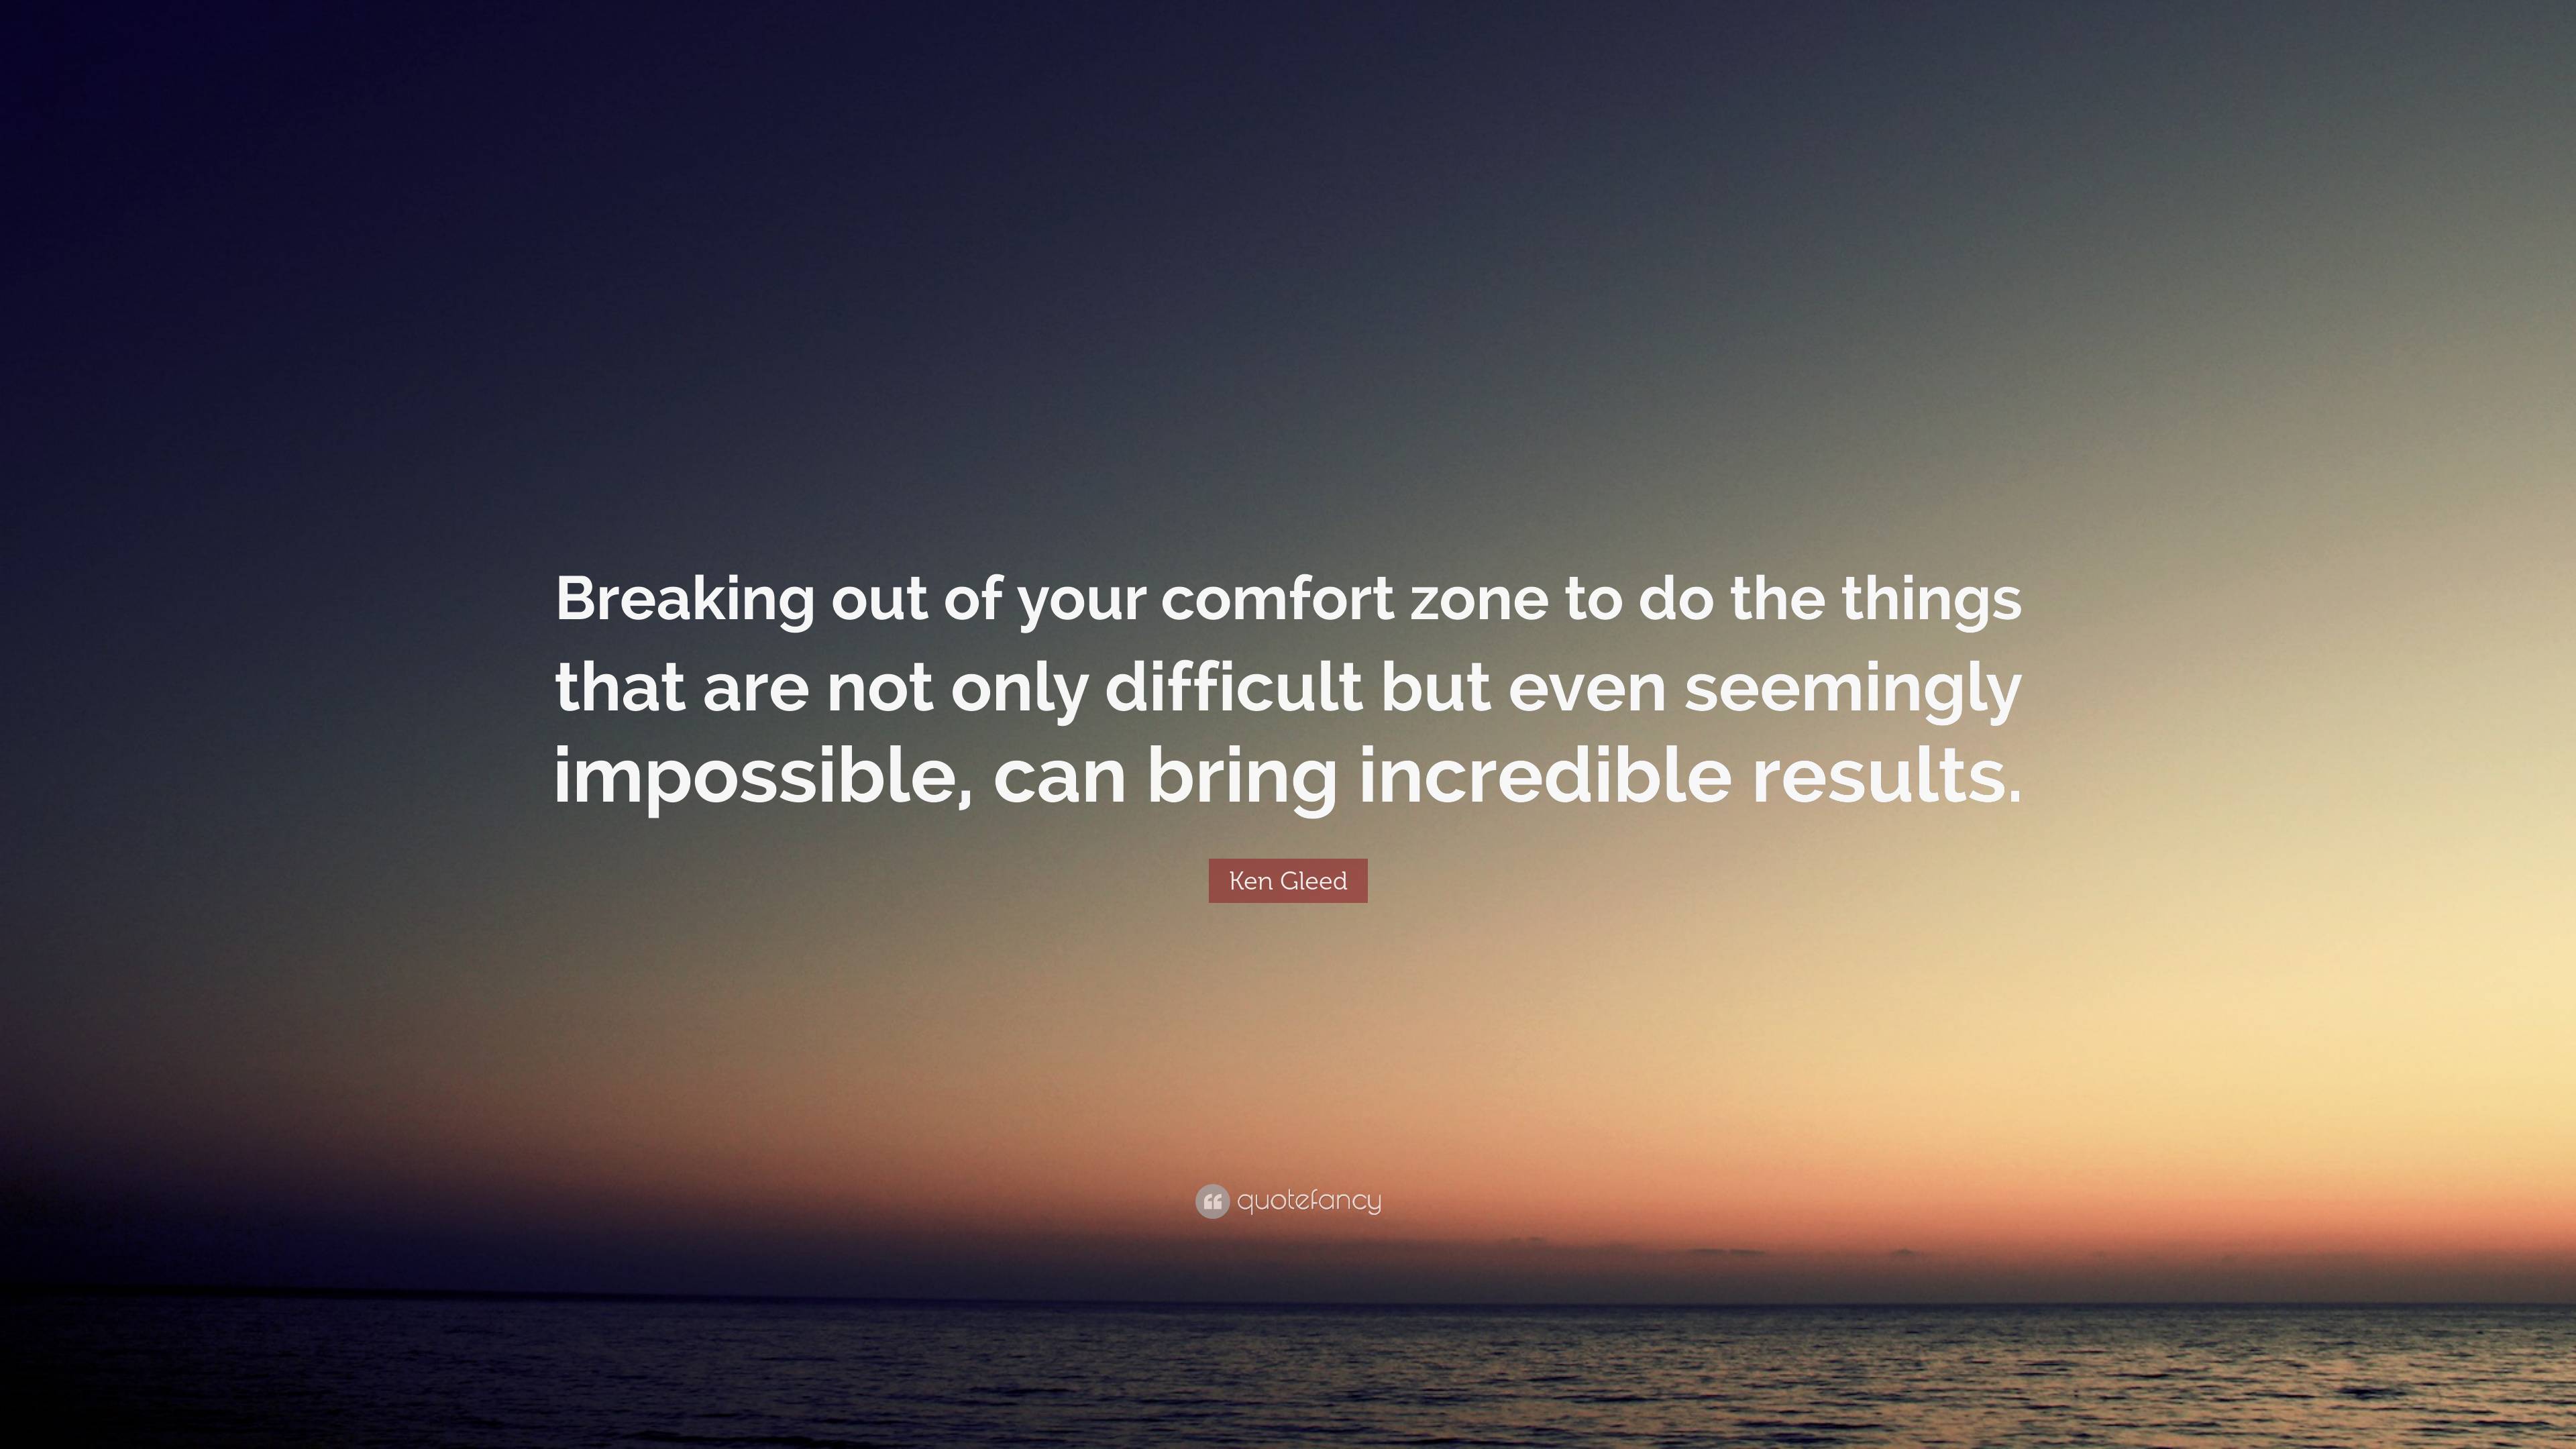 20 Ideas To Break Out Of Your Comfort Zone - FocusU